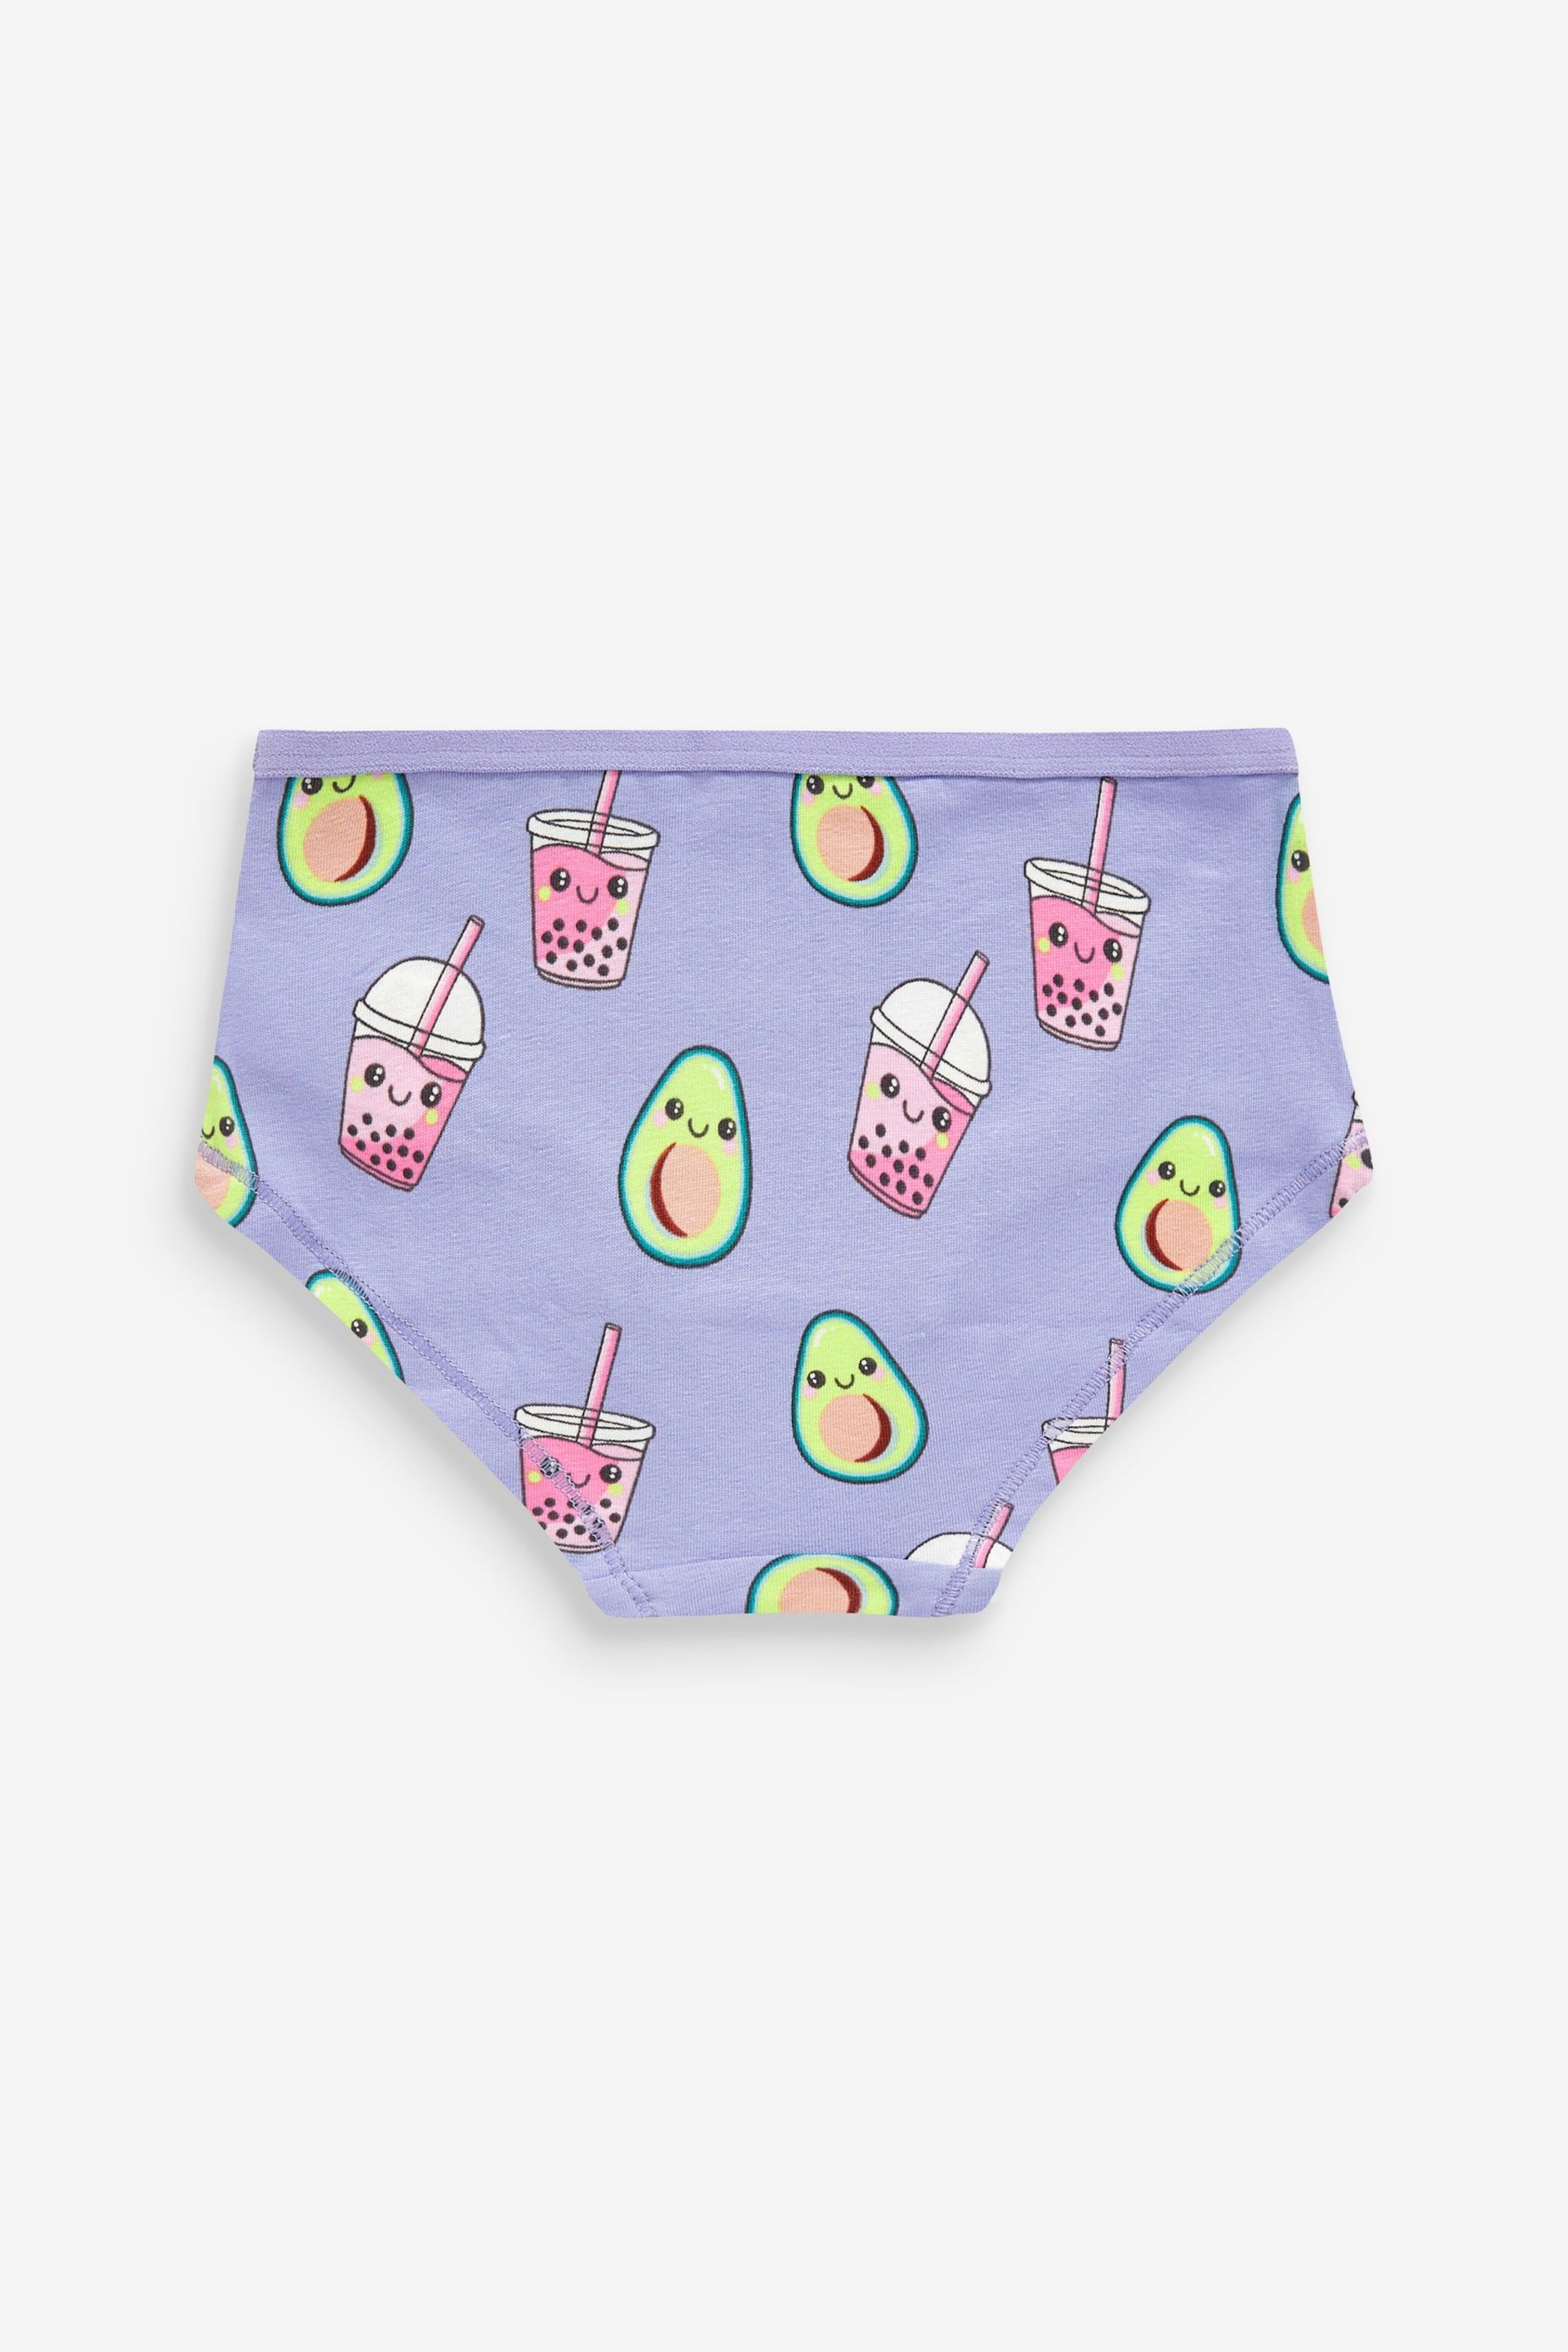 Pink/Grey Avocado Hipster Briefs 5 Pack (2-16yrs) - Image 3 of 8